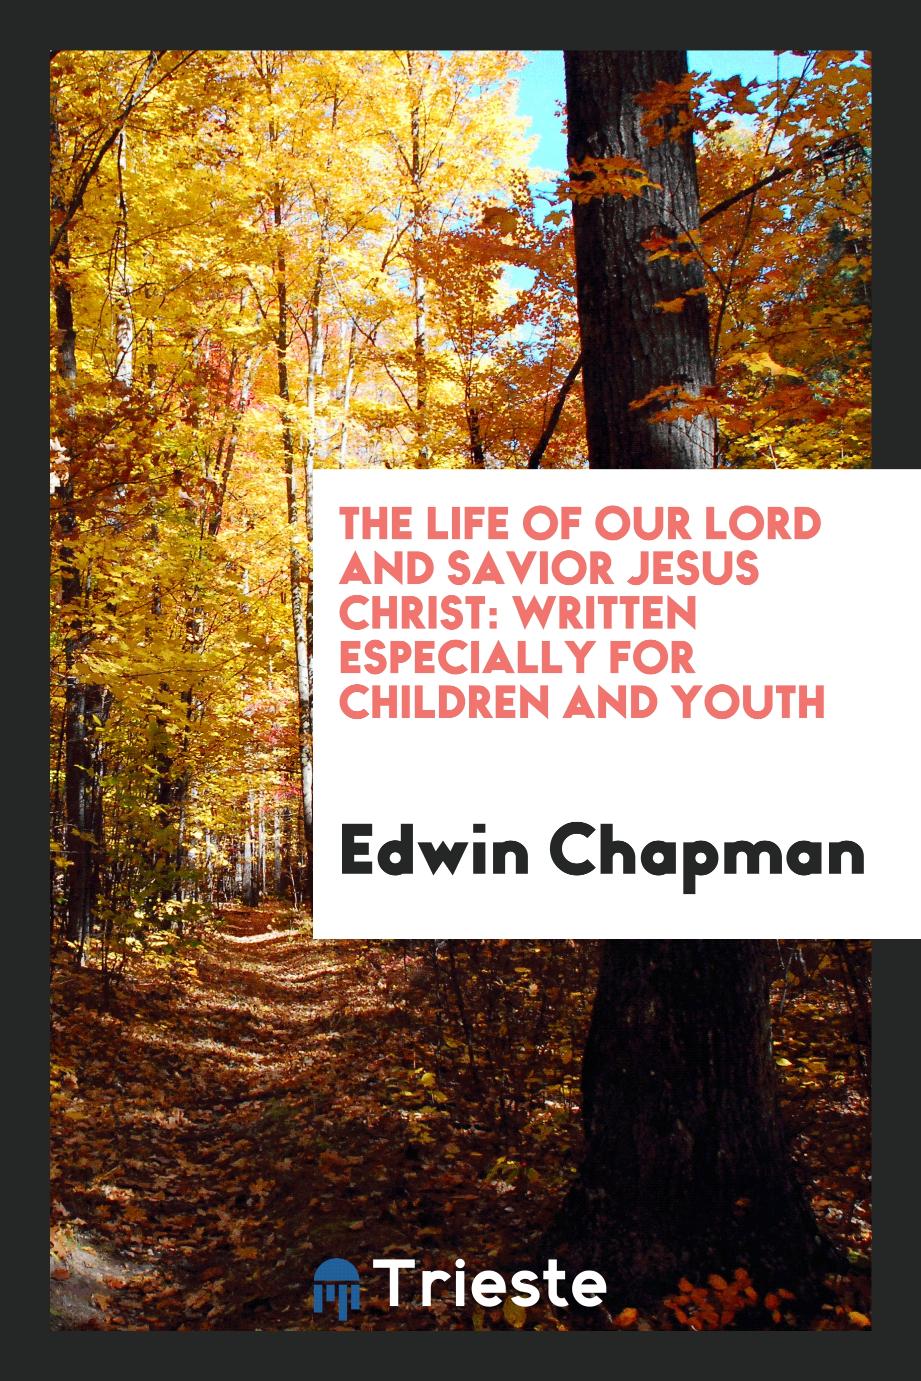 The Life of Our Lord and Savior Jesus Christ: Written Especially for Children and Youth